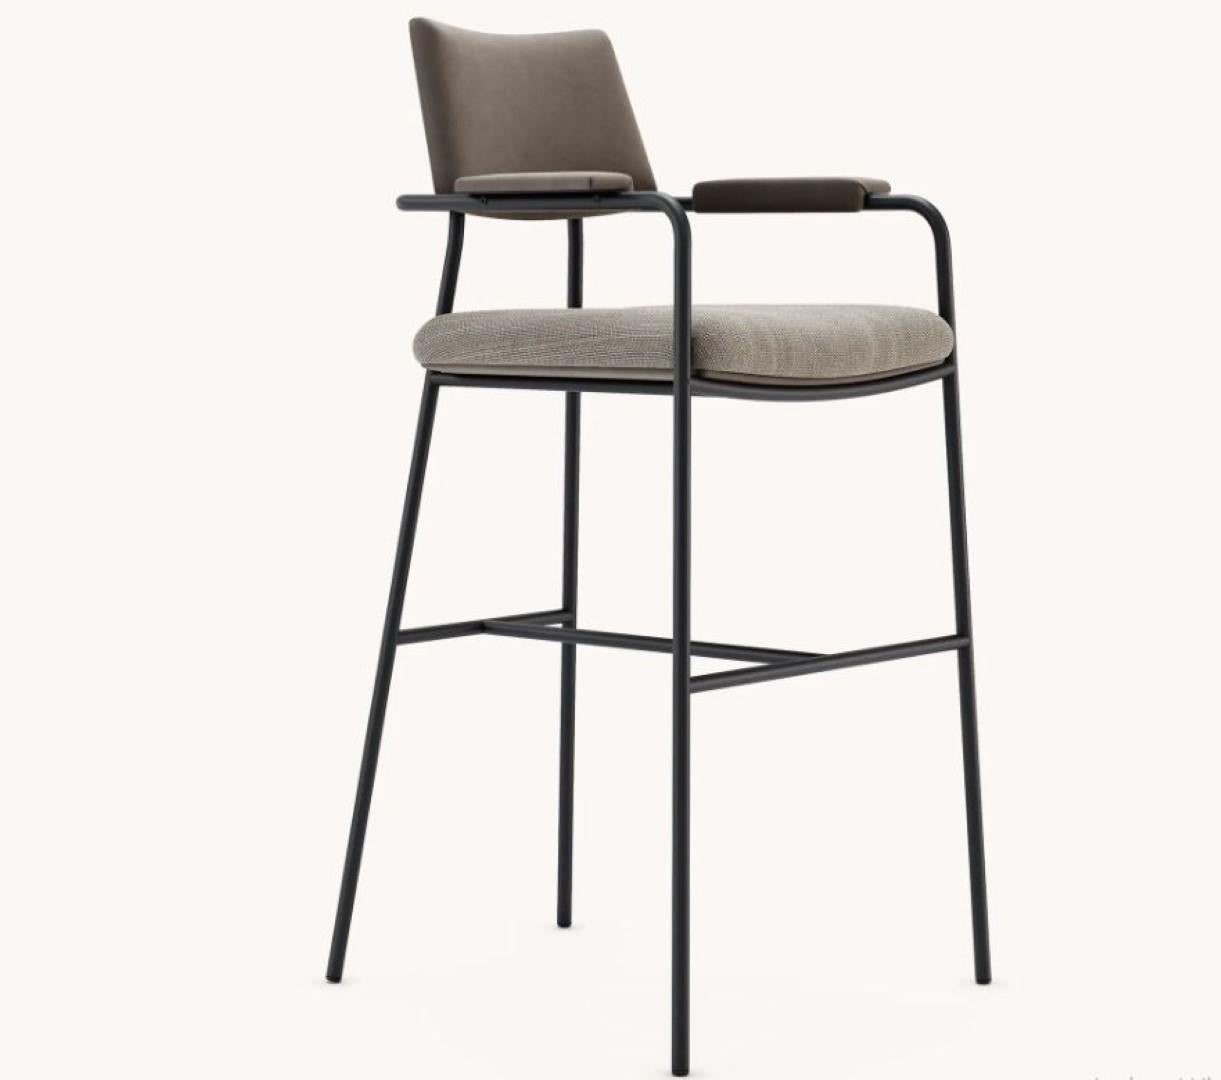 Stranger bar chair by Domkapa
Materials: fiber, black texturized steel. 
Dimensions: W 62 x D 65 x H 120 cm. 
Also available in different materials.

The robust metal structure of Stranger bar and counter chairs gives this design powerful and